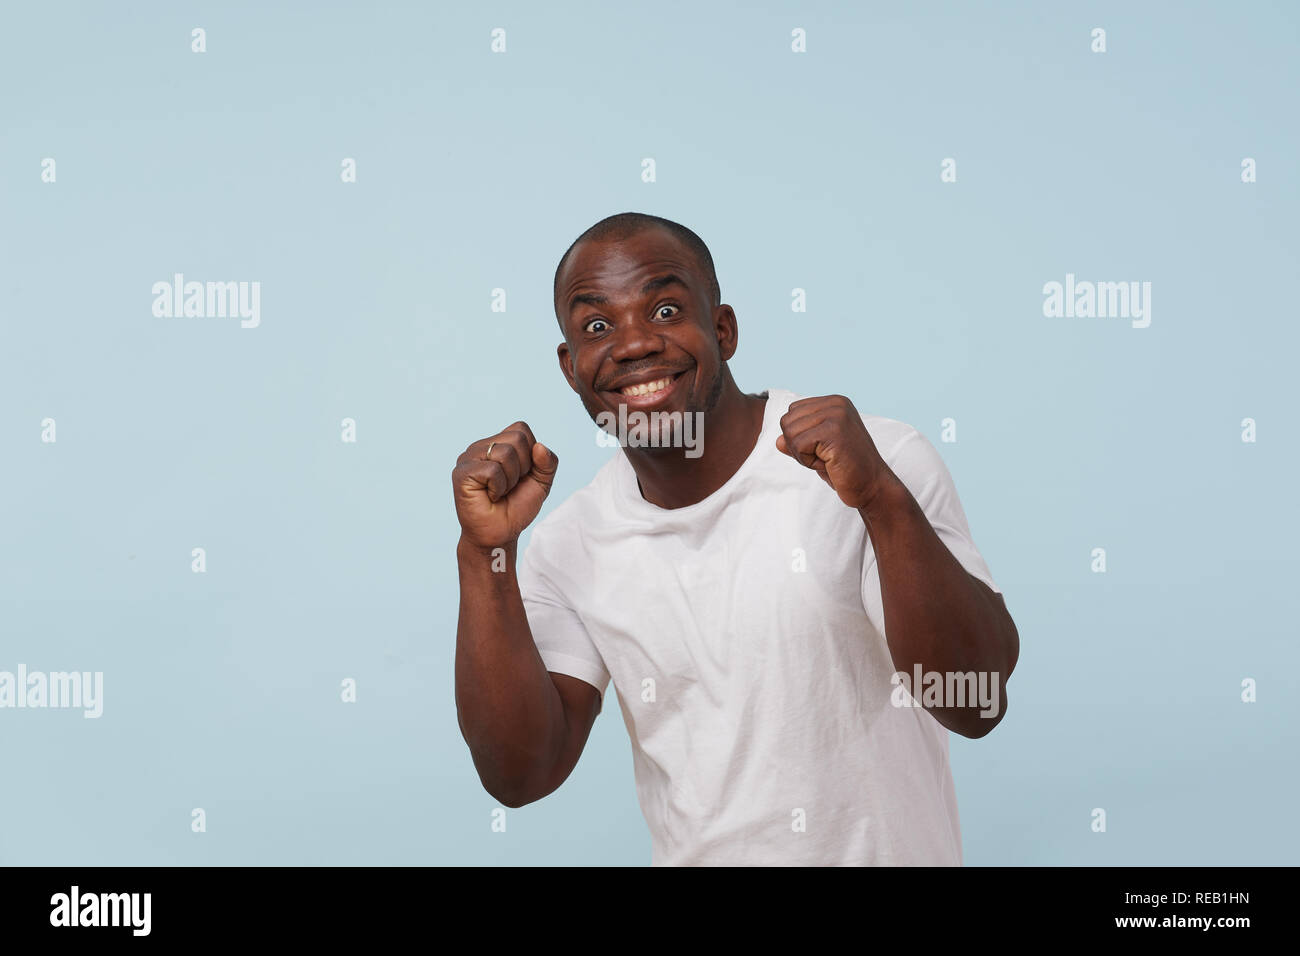 Handsome bold black man in white T-shirt is looking at camera and smiling,  grimacing against pale blue background. Fists closed, crazy eyes wide open  Stock Photo - Alamy